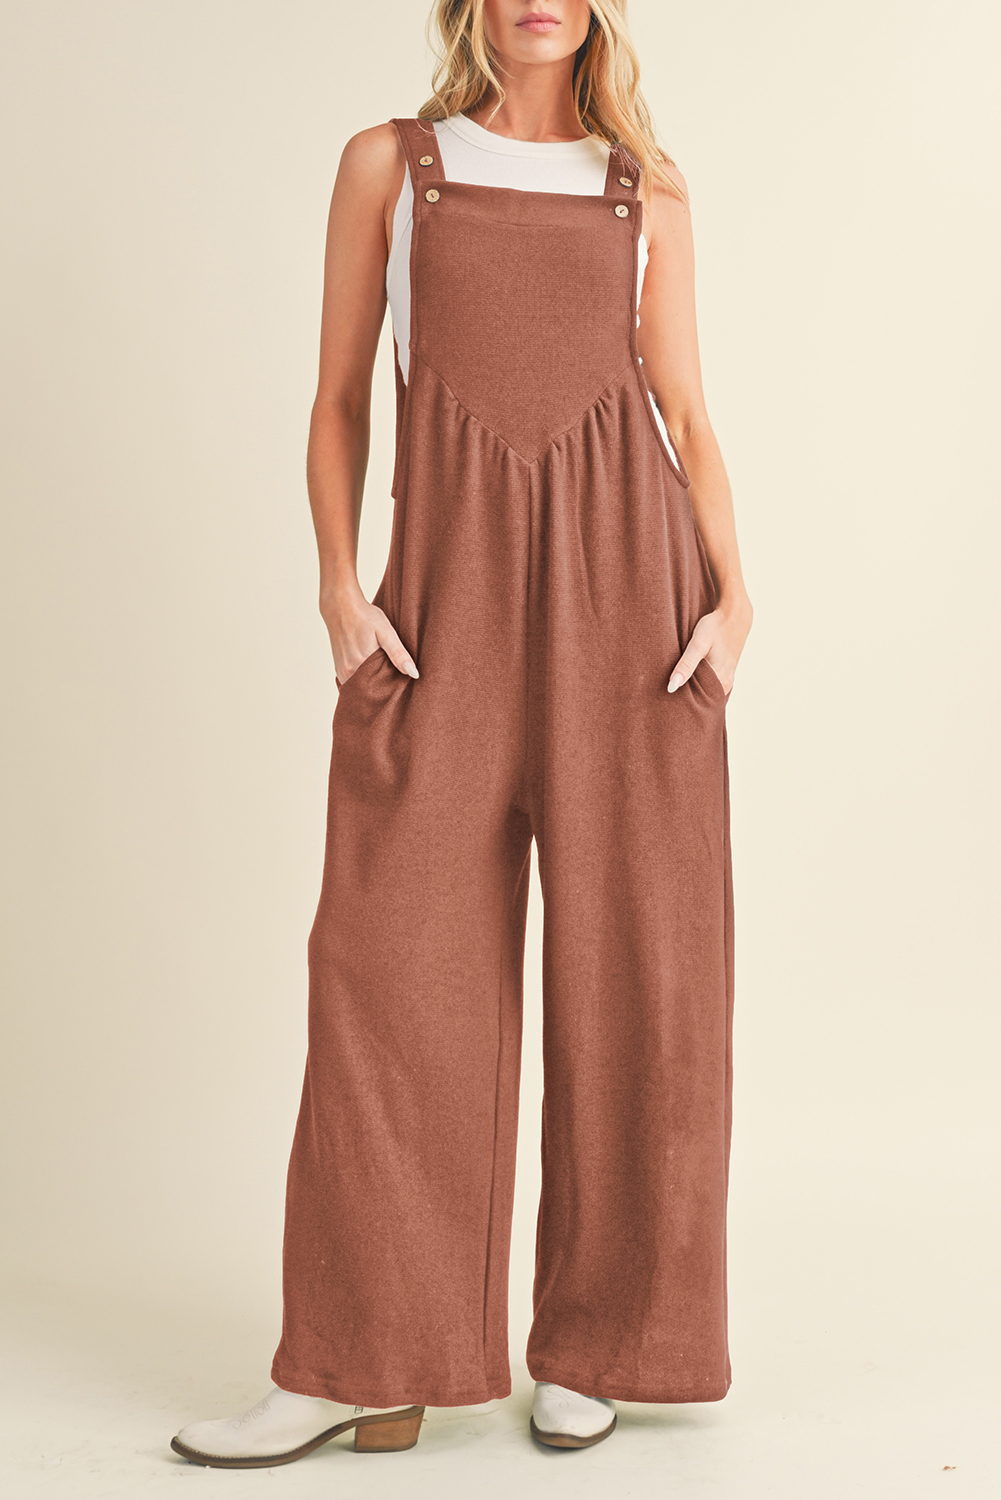  GOLD Flame Textured Buttoned Straps Ruched Wide Leg Jumpsuit